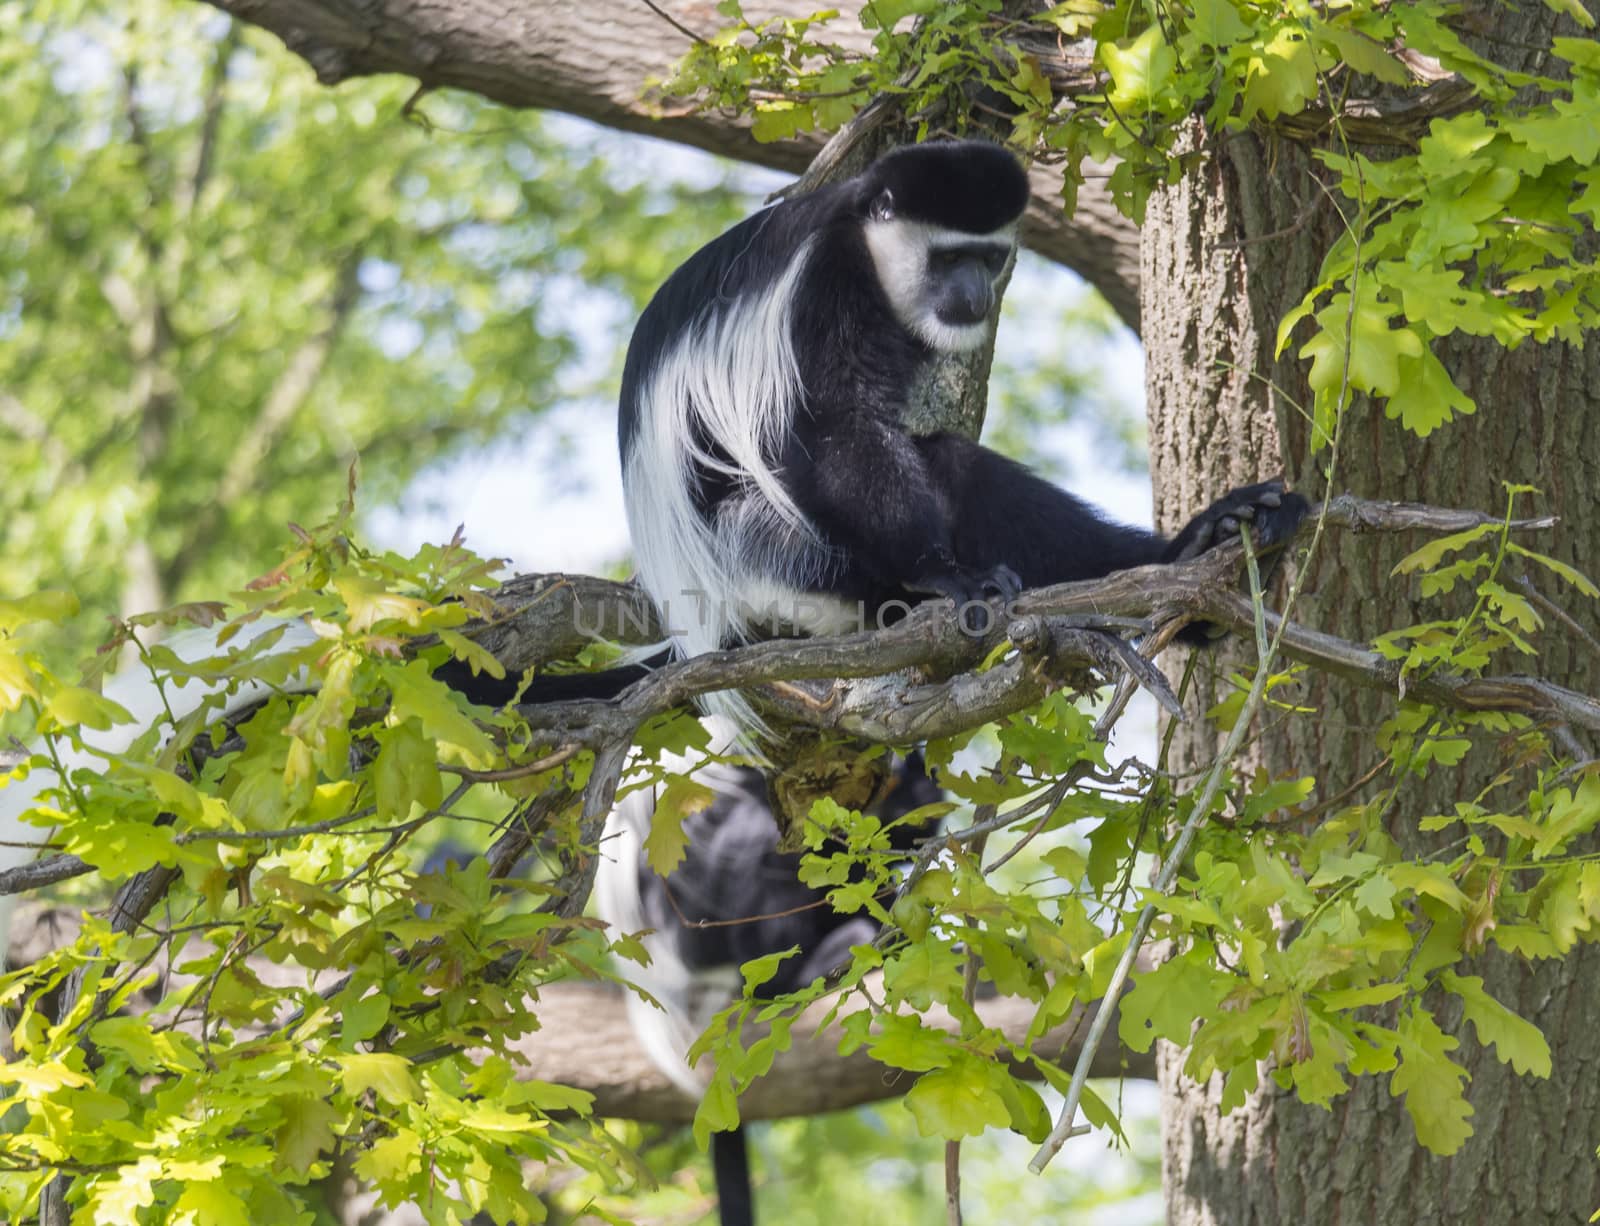 young Mantled guereza monkey also named Colobus guereza sitting on tree branch, natural sunlight, copy space by Henkeova